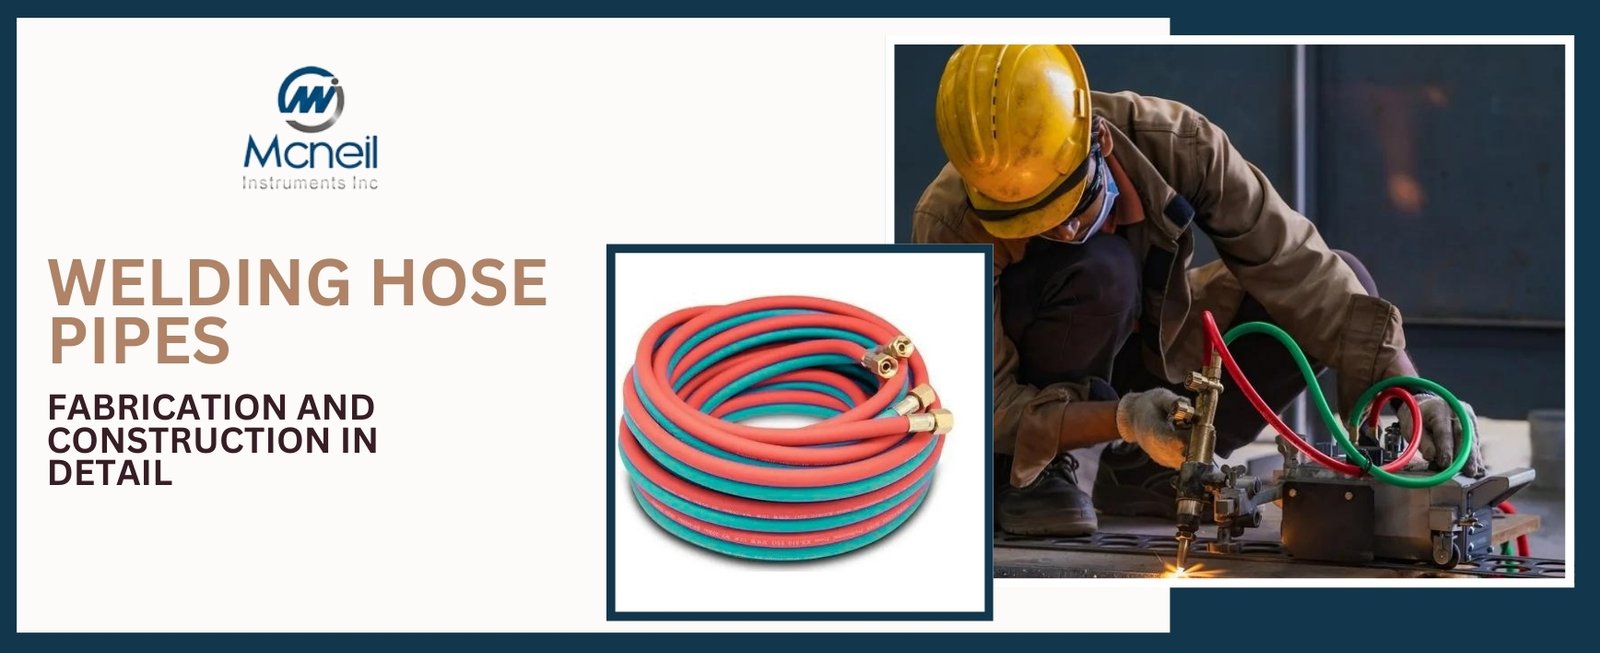 Welding Hose Pipes Fabrication and Construction in Detail